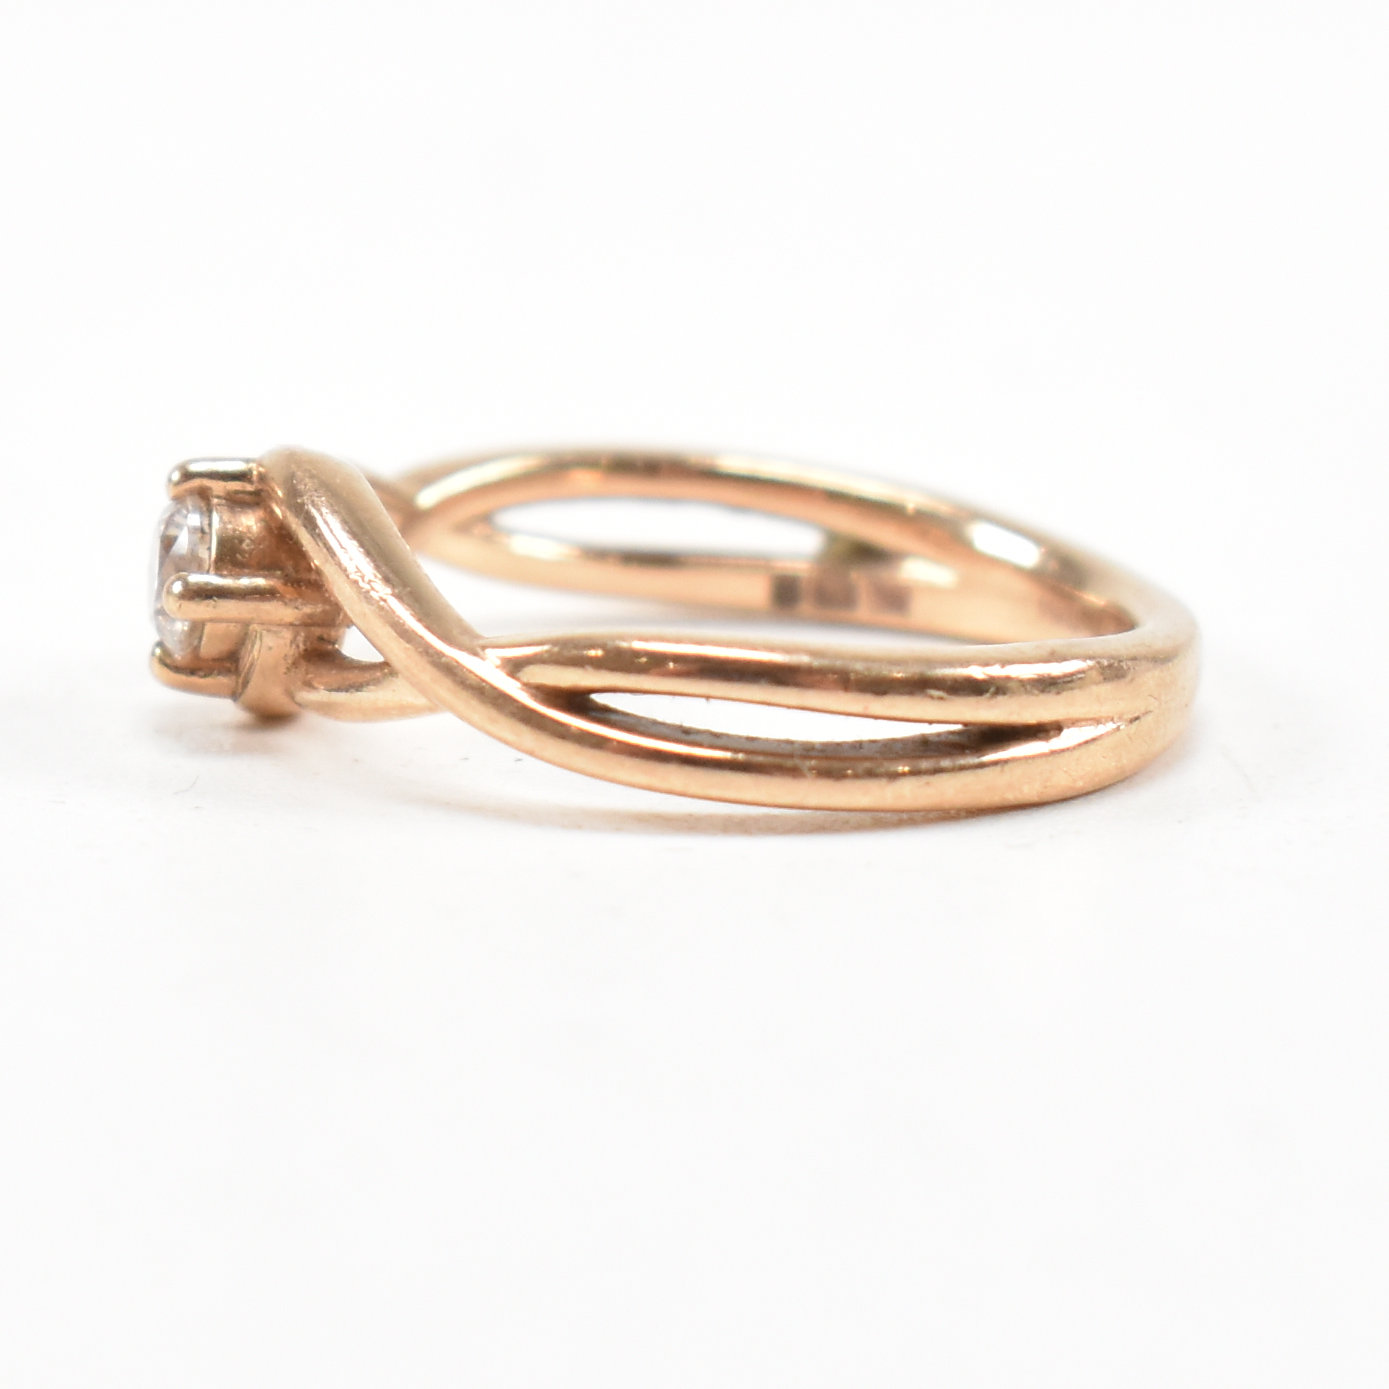 HALLMARKED 9CT ROSE GOLD & WHITE STONE SOLITAIRE CROSSOVER RING - Image 4 of 9